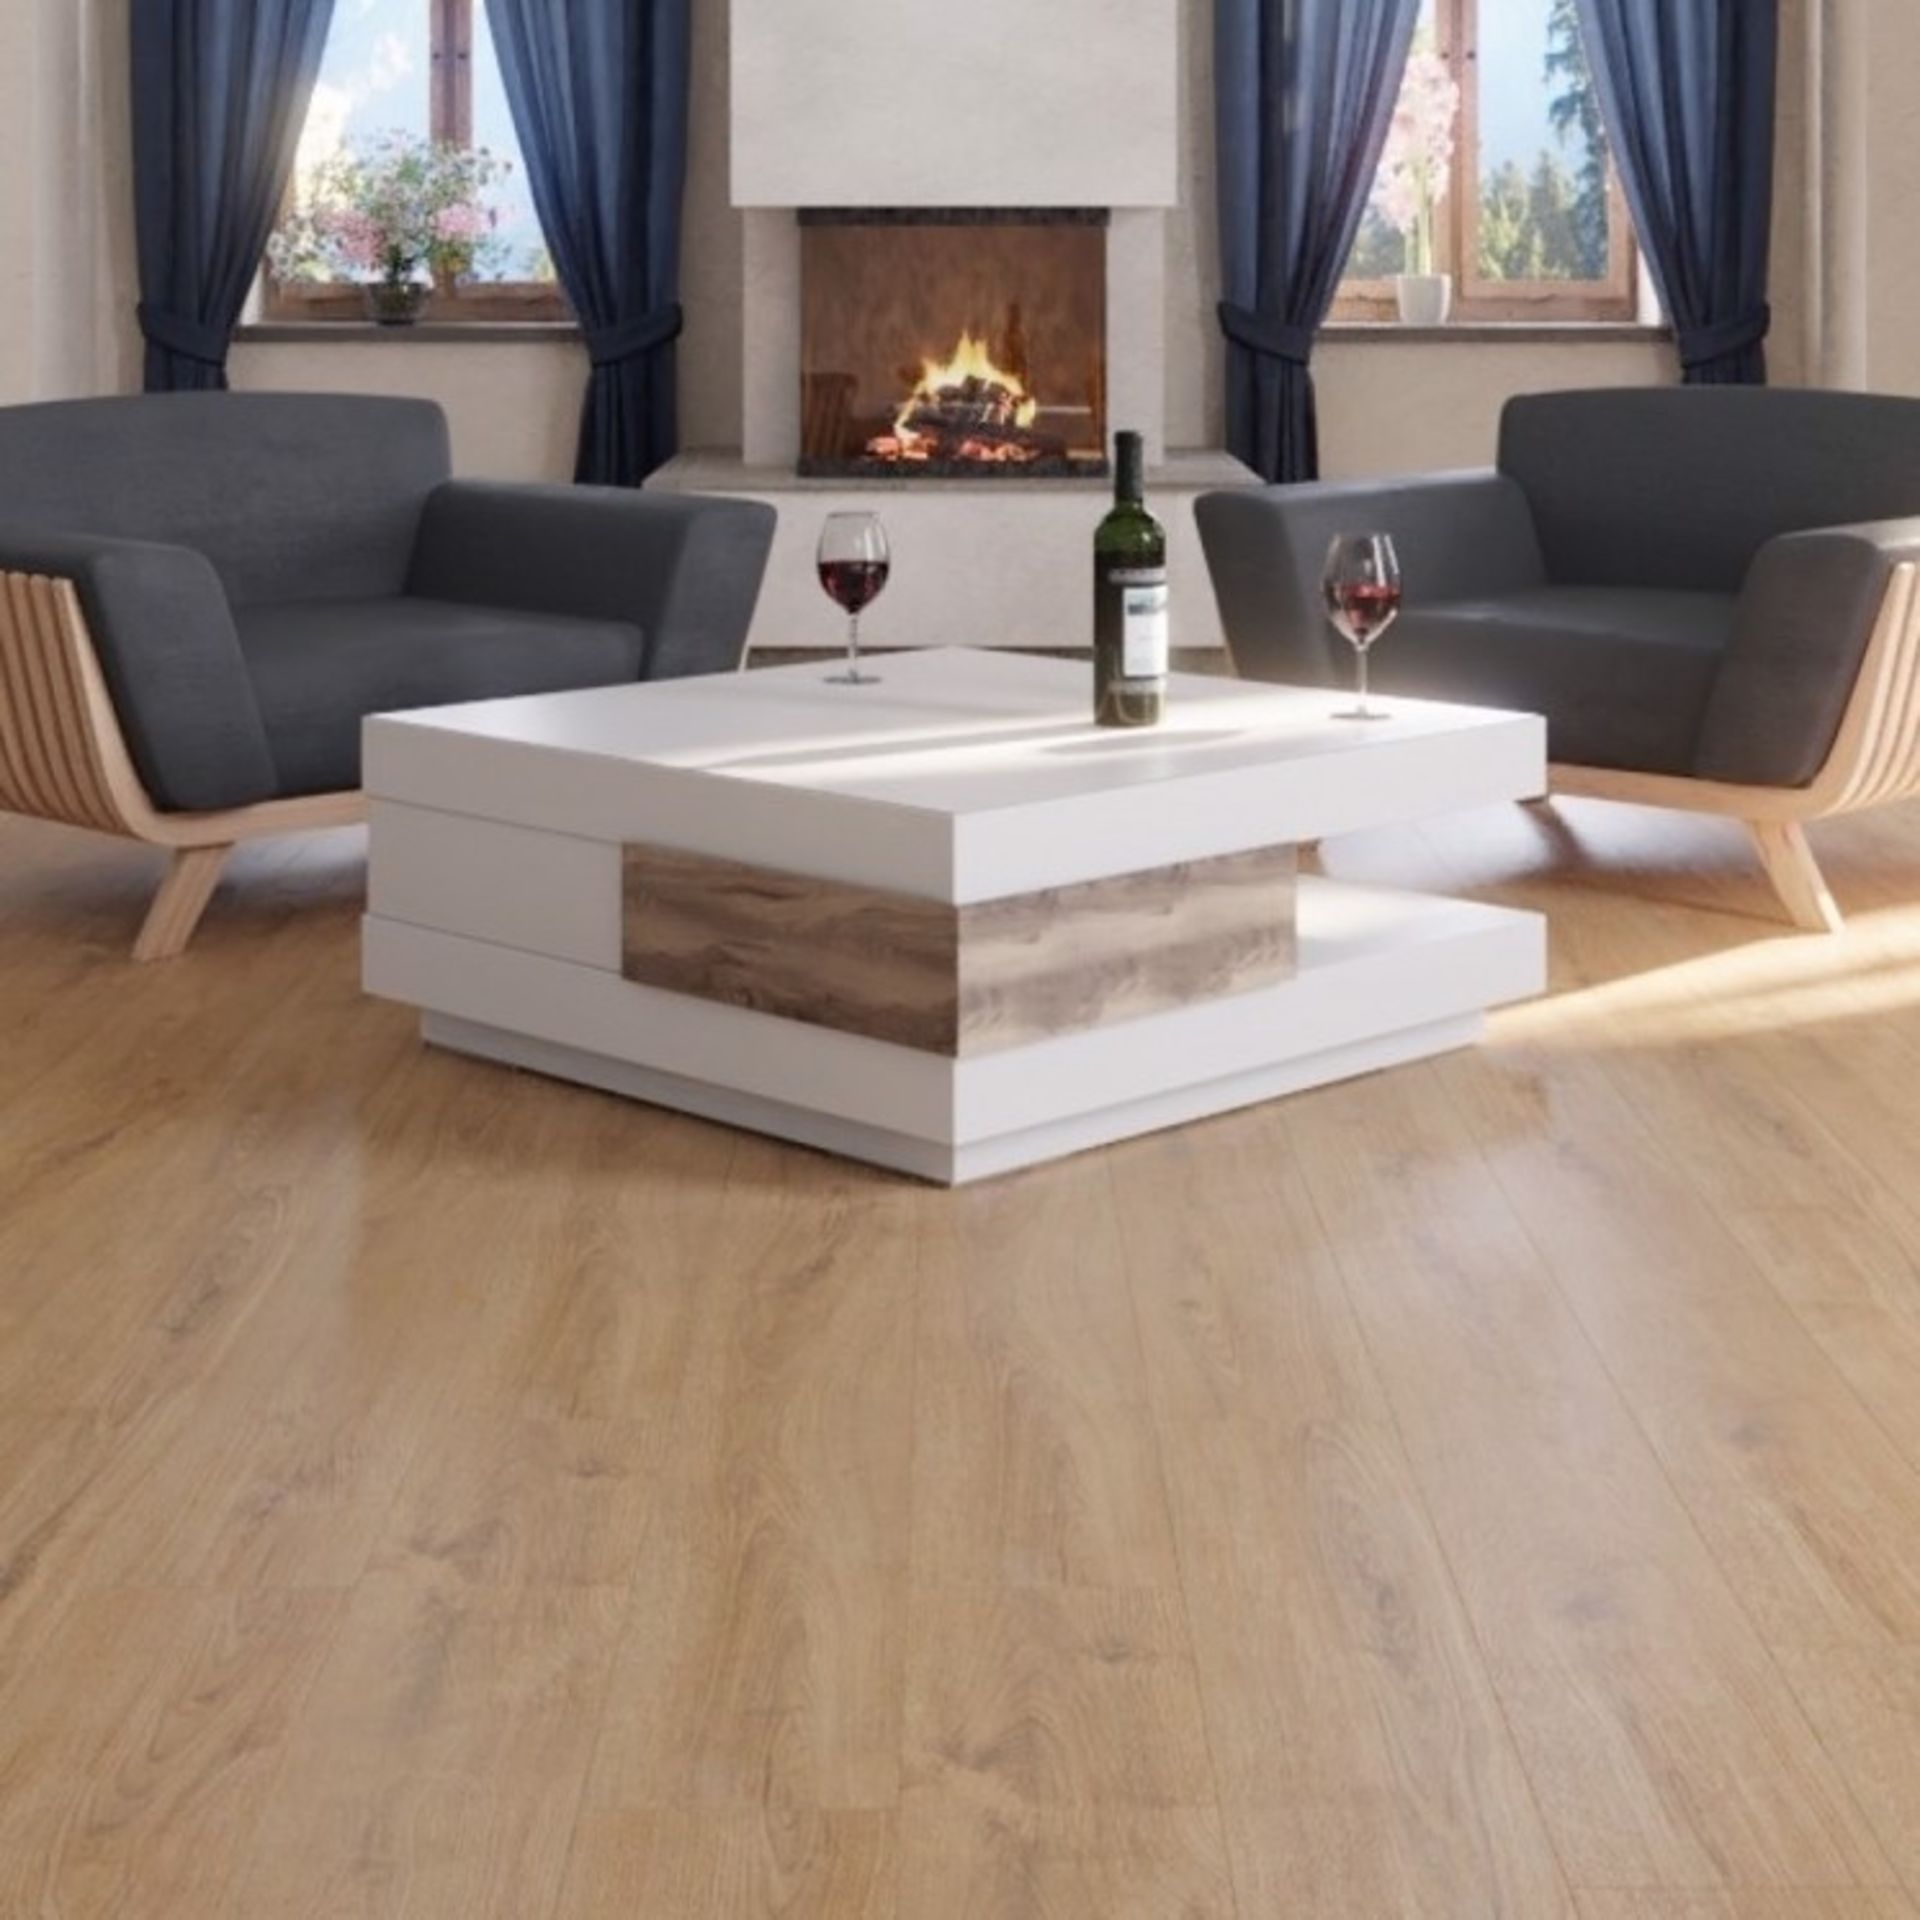 NEW 9.56m2 LAMINATE FLOORING SUMMER NATURAL OAK. With a warming natural oak tone, this floor is...